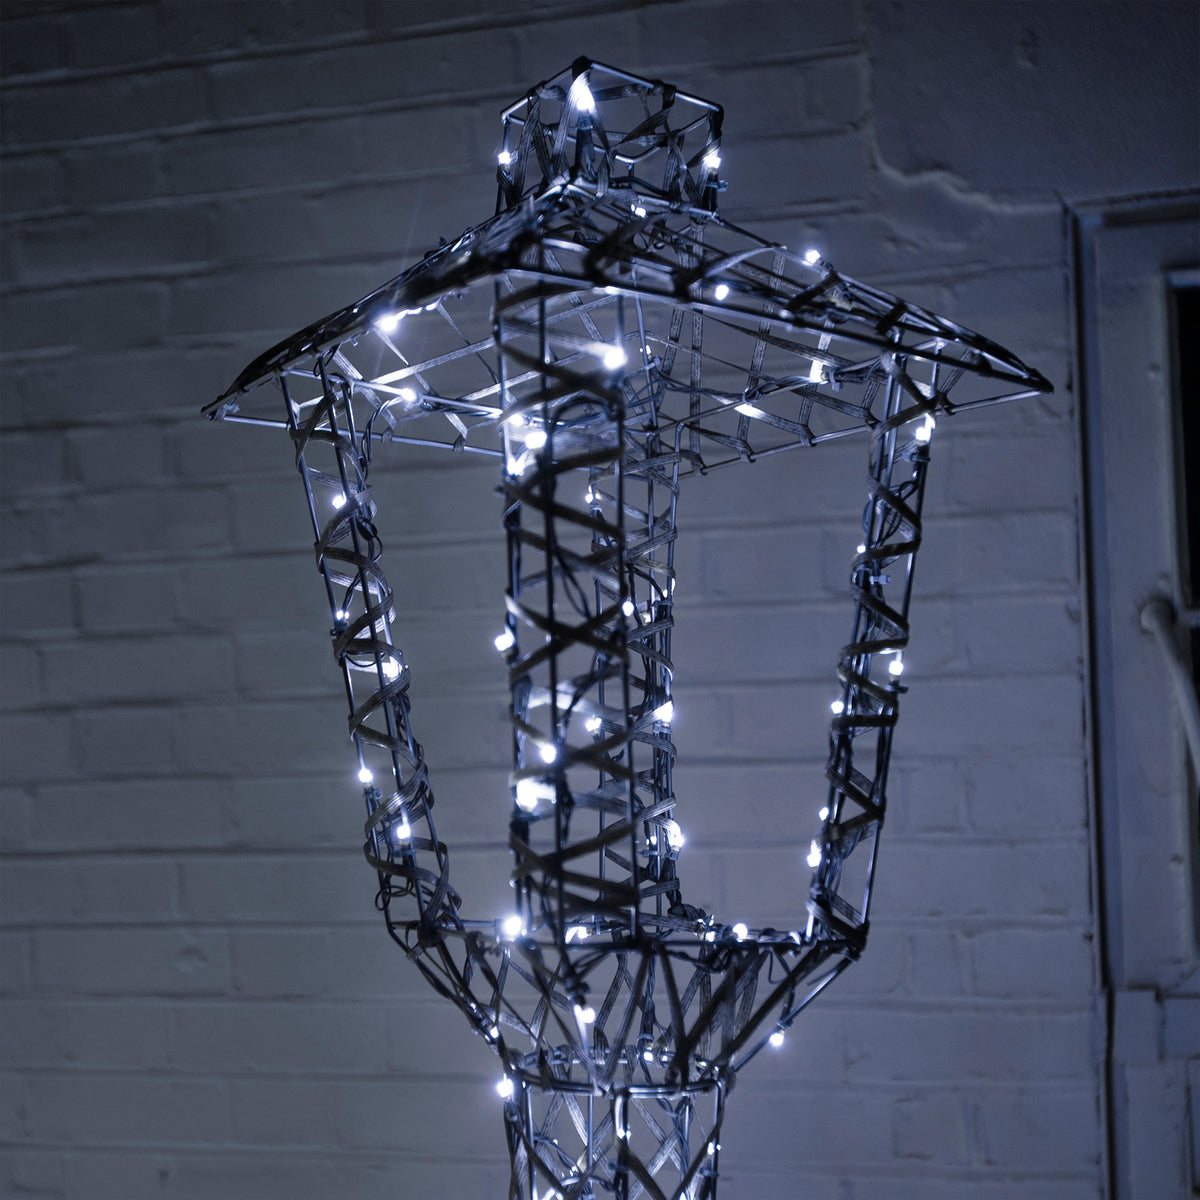 Light Up Christmas Lamp Post Lantern in Grey Weave with 200 White/Warm White LEDs -1.8m